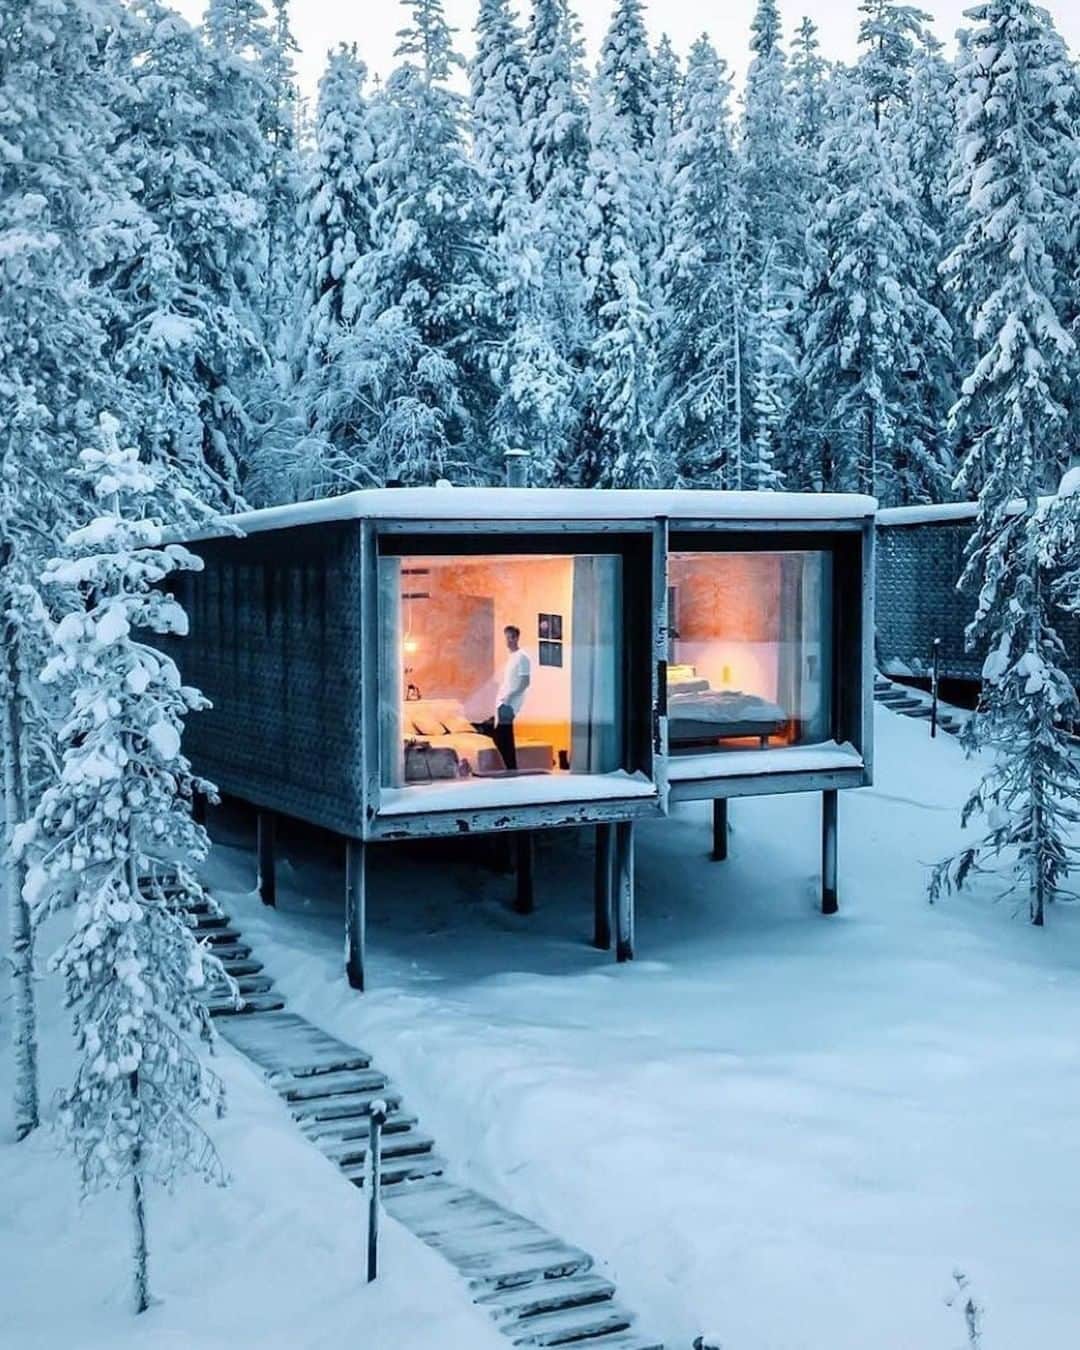 Architecture - Housesさんのインスタグラム写真 - (Architecture - HousesInstagram)「⁣ 𝗪𝗶𝗻𝘁𝗲𝗿 𝘀𝗵𝗲𝗹𝘁𝗲𝗿𝘀! ❄⁣ These 6 #cabins are just INCREDIBLE to spend a weekend getaway, don't you think? ❄ Spots where to enjoy nature, reconnect with yourself and be happy! 🙃 Tag who you’d stay here with and leave a double tap if you love it! 🖤⁣⁣⁣ _____⁣⁣⁣⁣⁣⁣⁣ 📸⁣ 1. By William O'Brian Jr & Peter Guthrie⁣ 2. @bradenstanley  3. @therollingvan  4. @meirr  5. By Frank Lloyd Wright⁣ 6. @bradenstanley  #archidesignhome⁣⁣⁣ _____⁣⁣⁣⁣⁣⁣ #cabinliving #cabinview #woodcabin #cabindesign #cabinfeed #forestcabin #forestcabins #cabinpics #cabinsinforests #cabinphotography #architecture #archilovers #cabingoals #treehouselife #treehouselove #treehousevilla #treehousegoals #cabindesigns #cabinsdaily #cozycabins #beautifulcabins #naturehouse」2月7日 0時10分 - _archidesignhome_